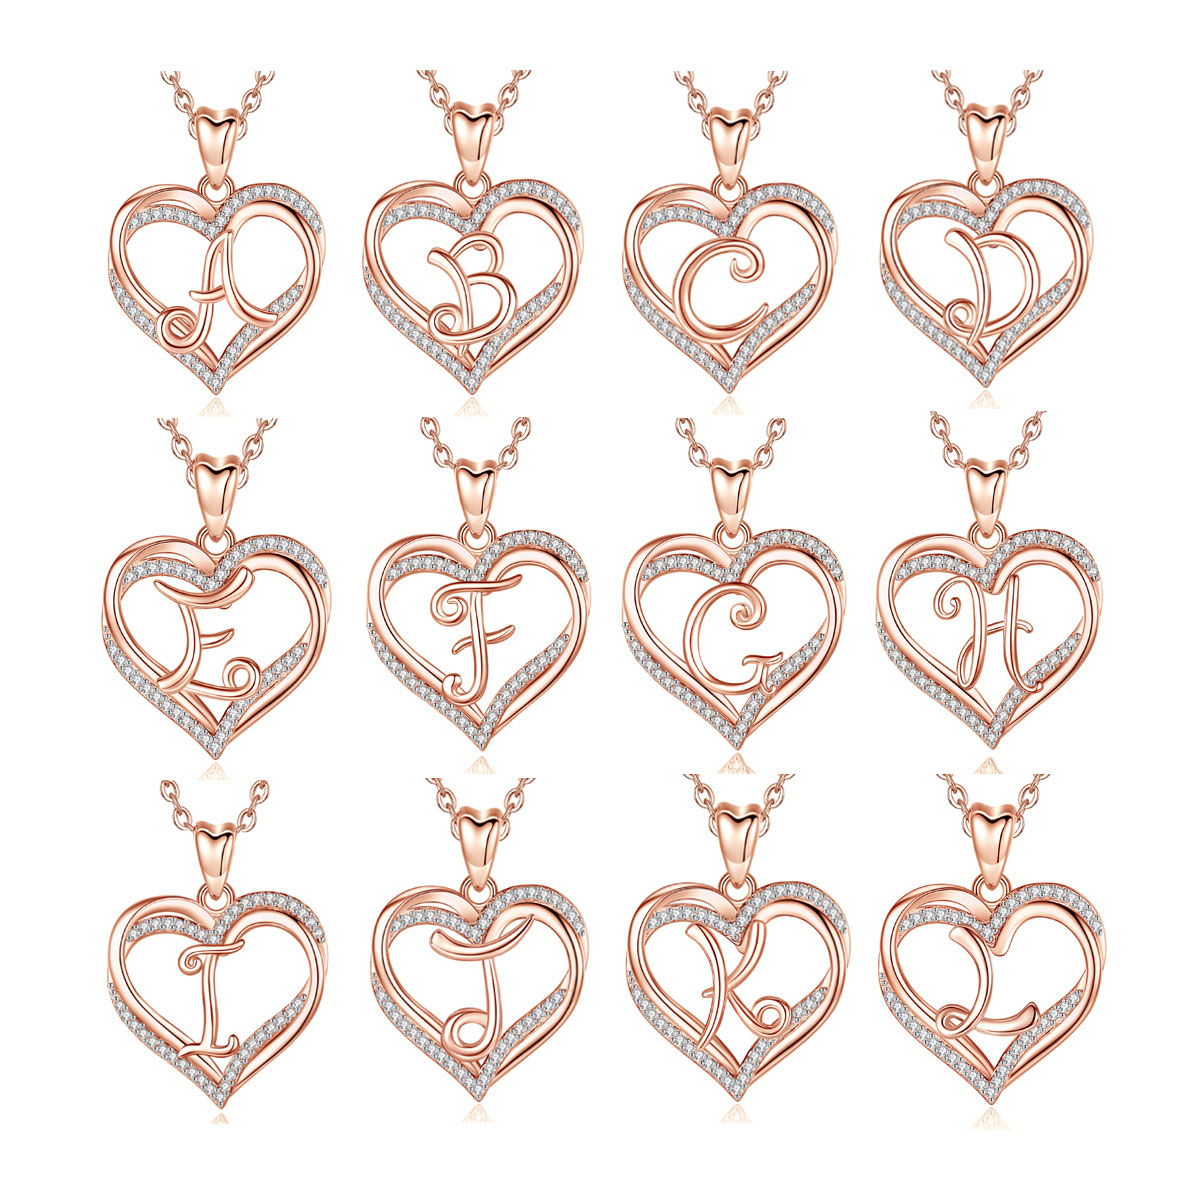 Merryshine Wholesale Rose Gold Plated Heart Charm 26 English Letter Initial Pendant Necklace